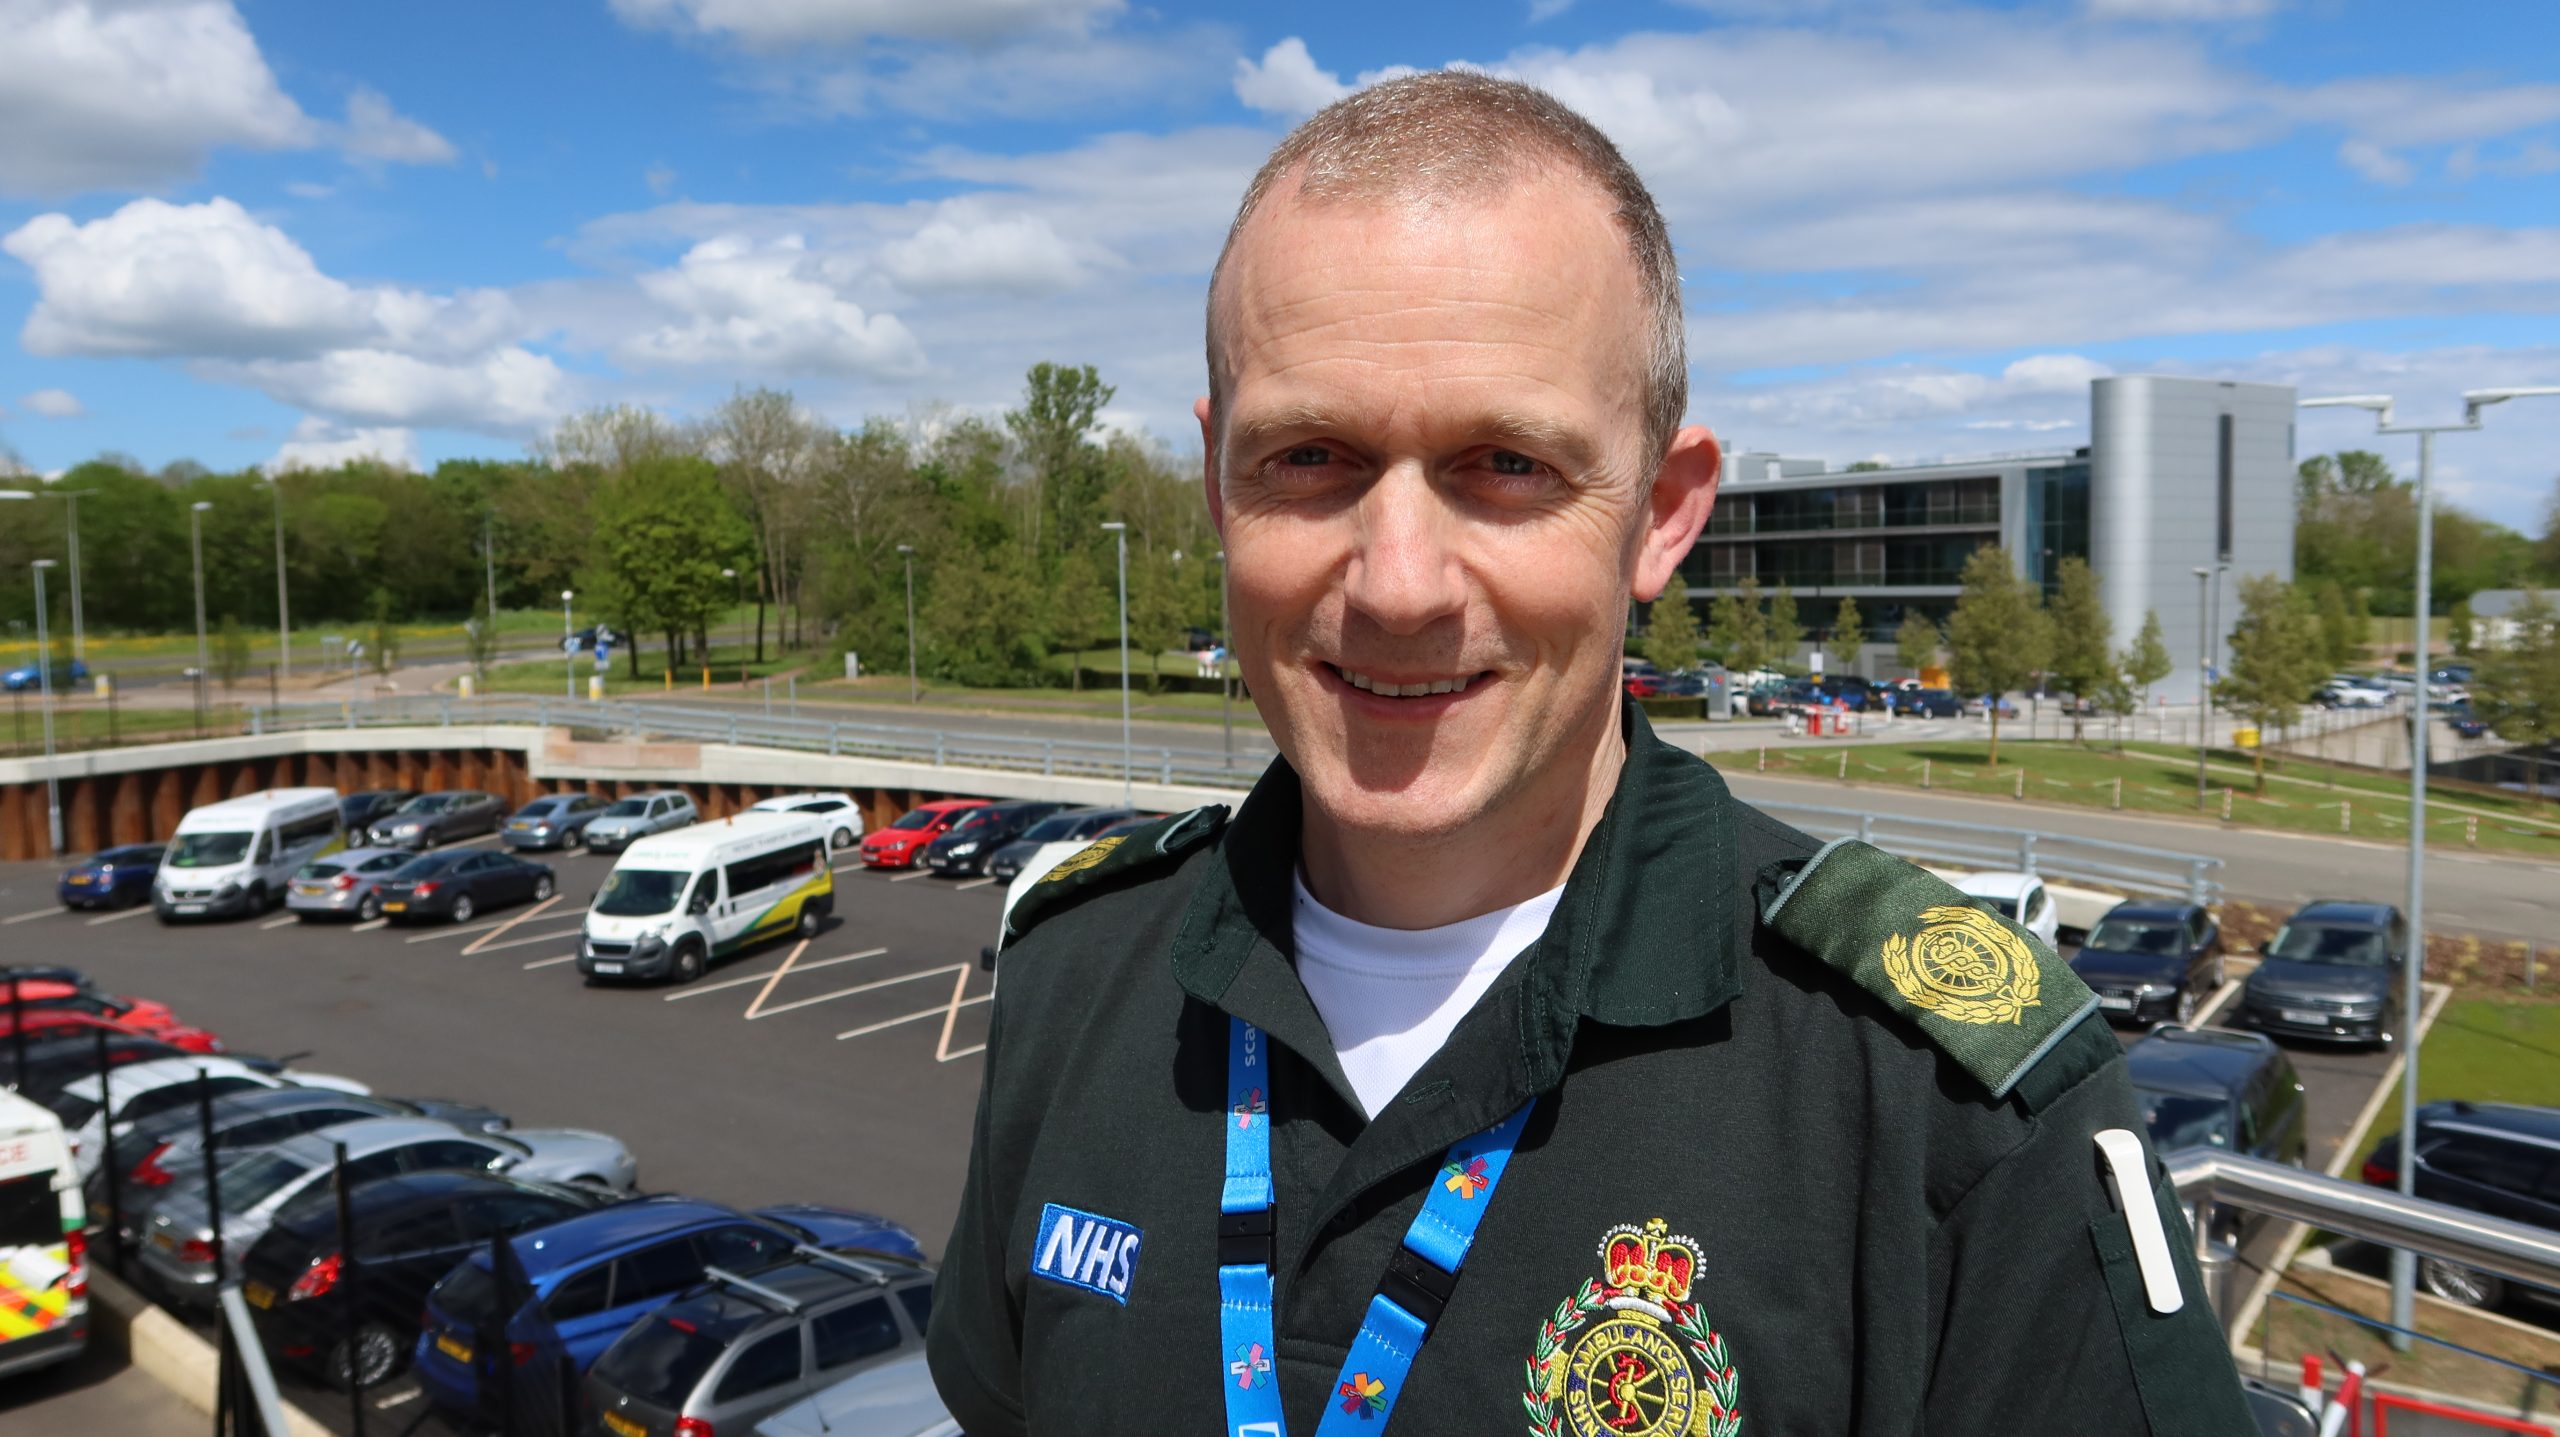 Chris Jackson, a specialist paramedic and urgent care pathways lead at SCAS